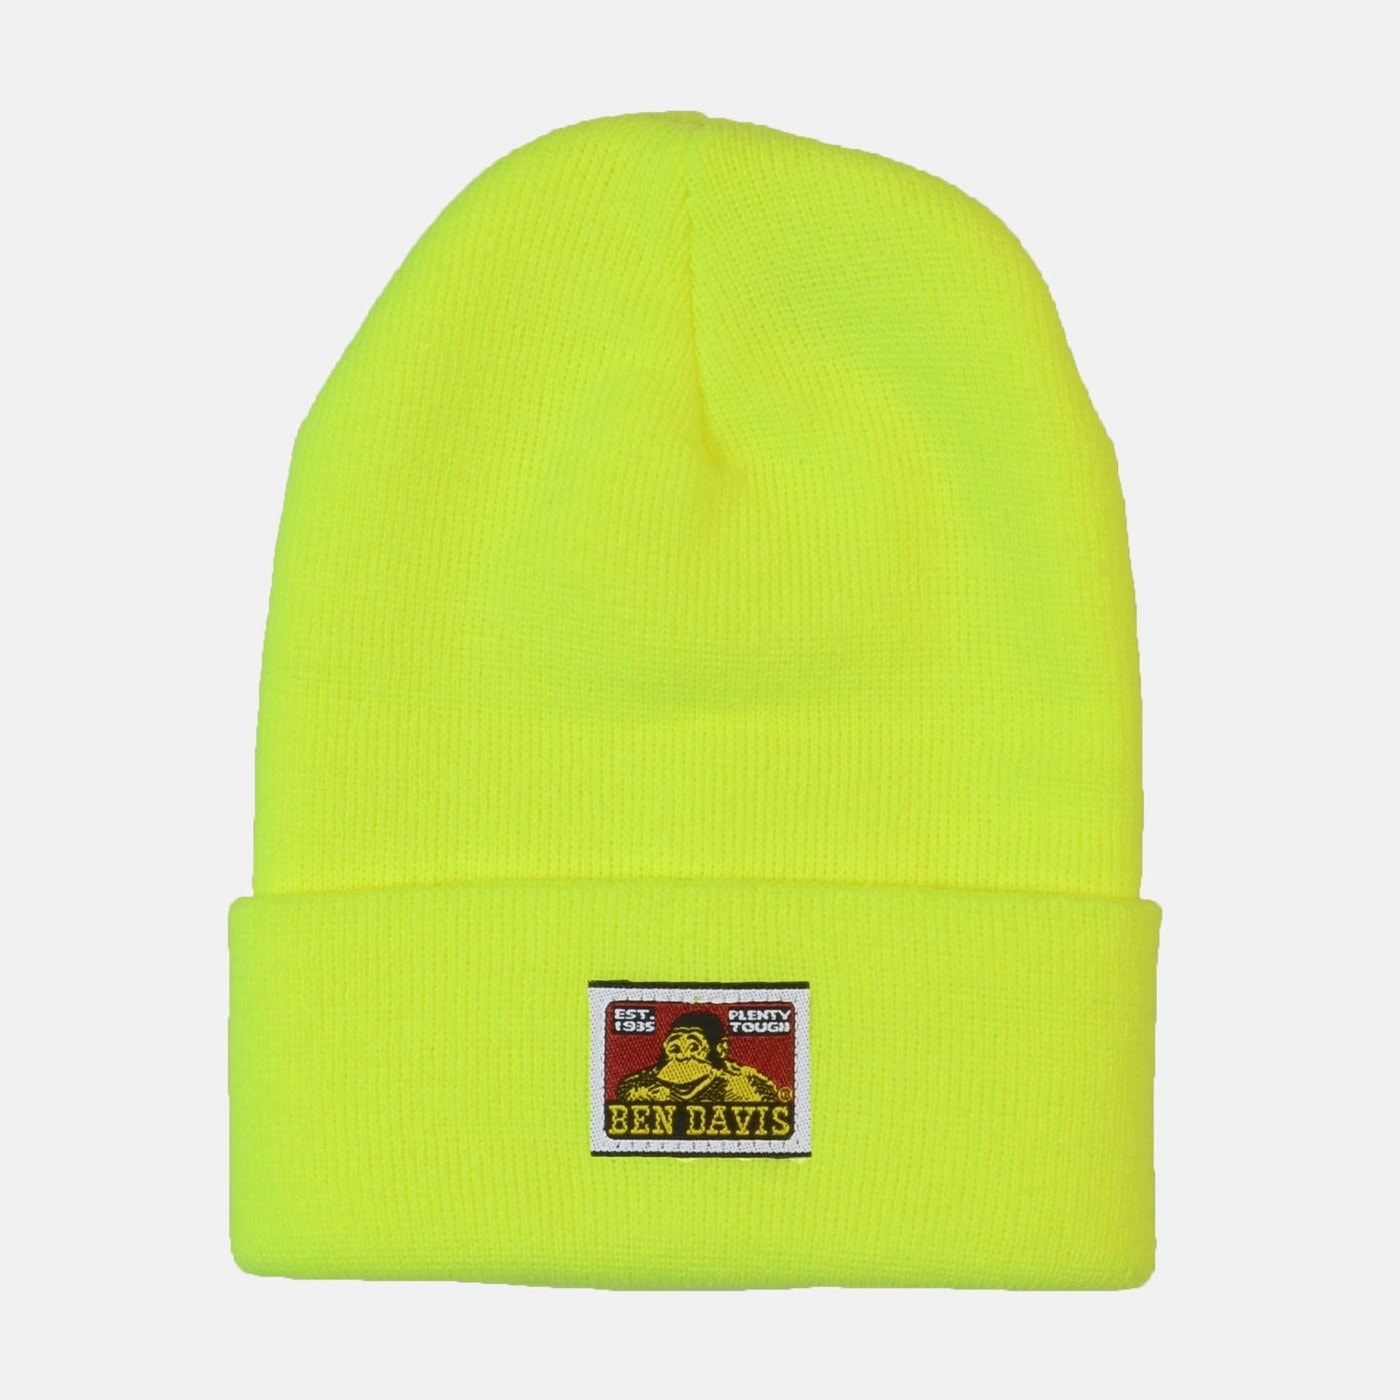 Product photo showing Ben Davis beanie in safety yellow